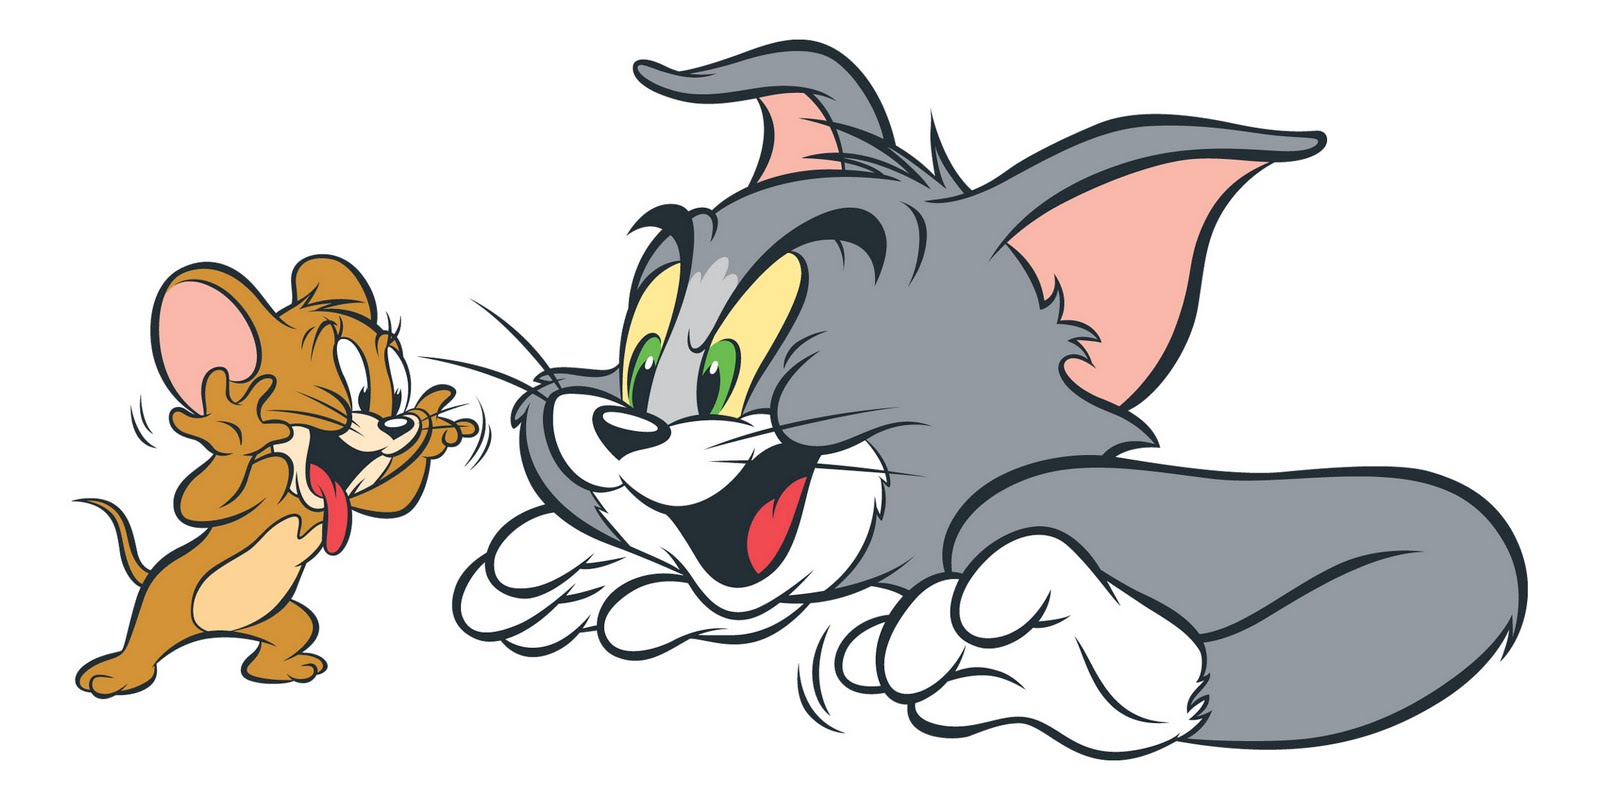 Patrick Owsley Cartoon Art and More!: TOM AND JERRY!